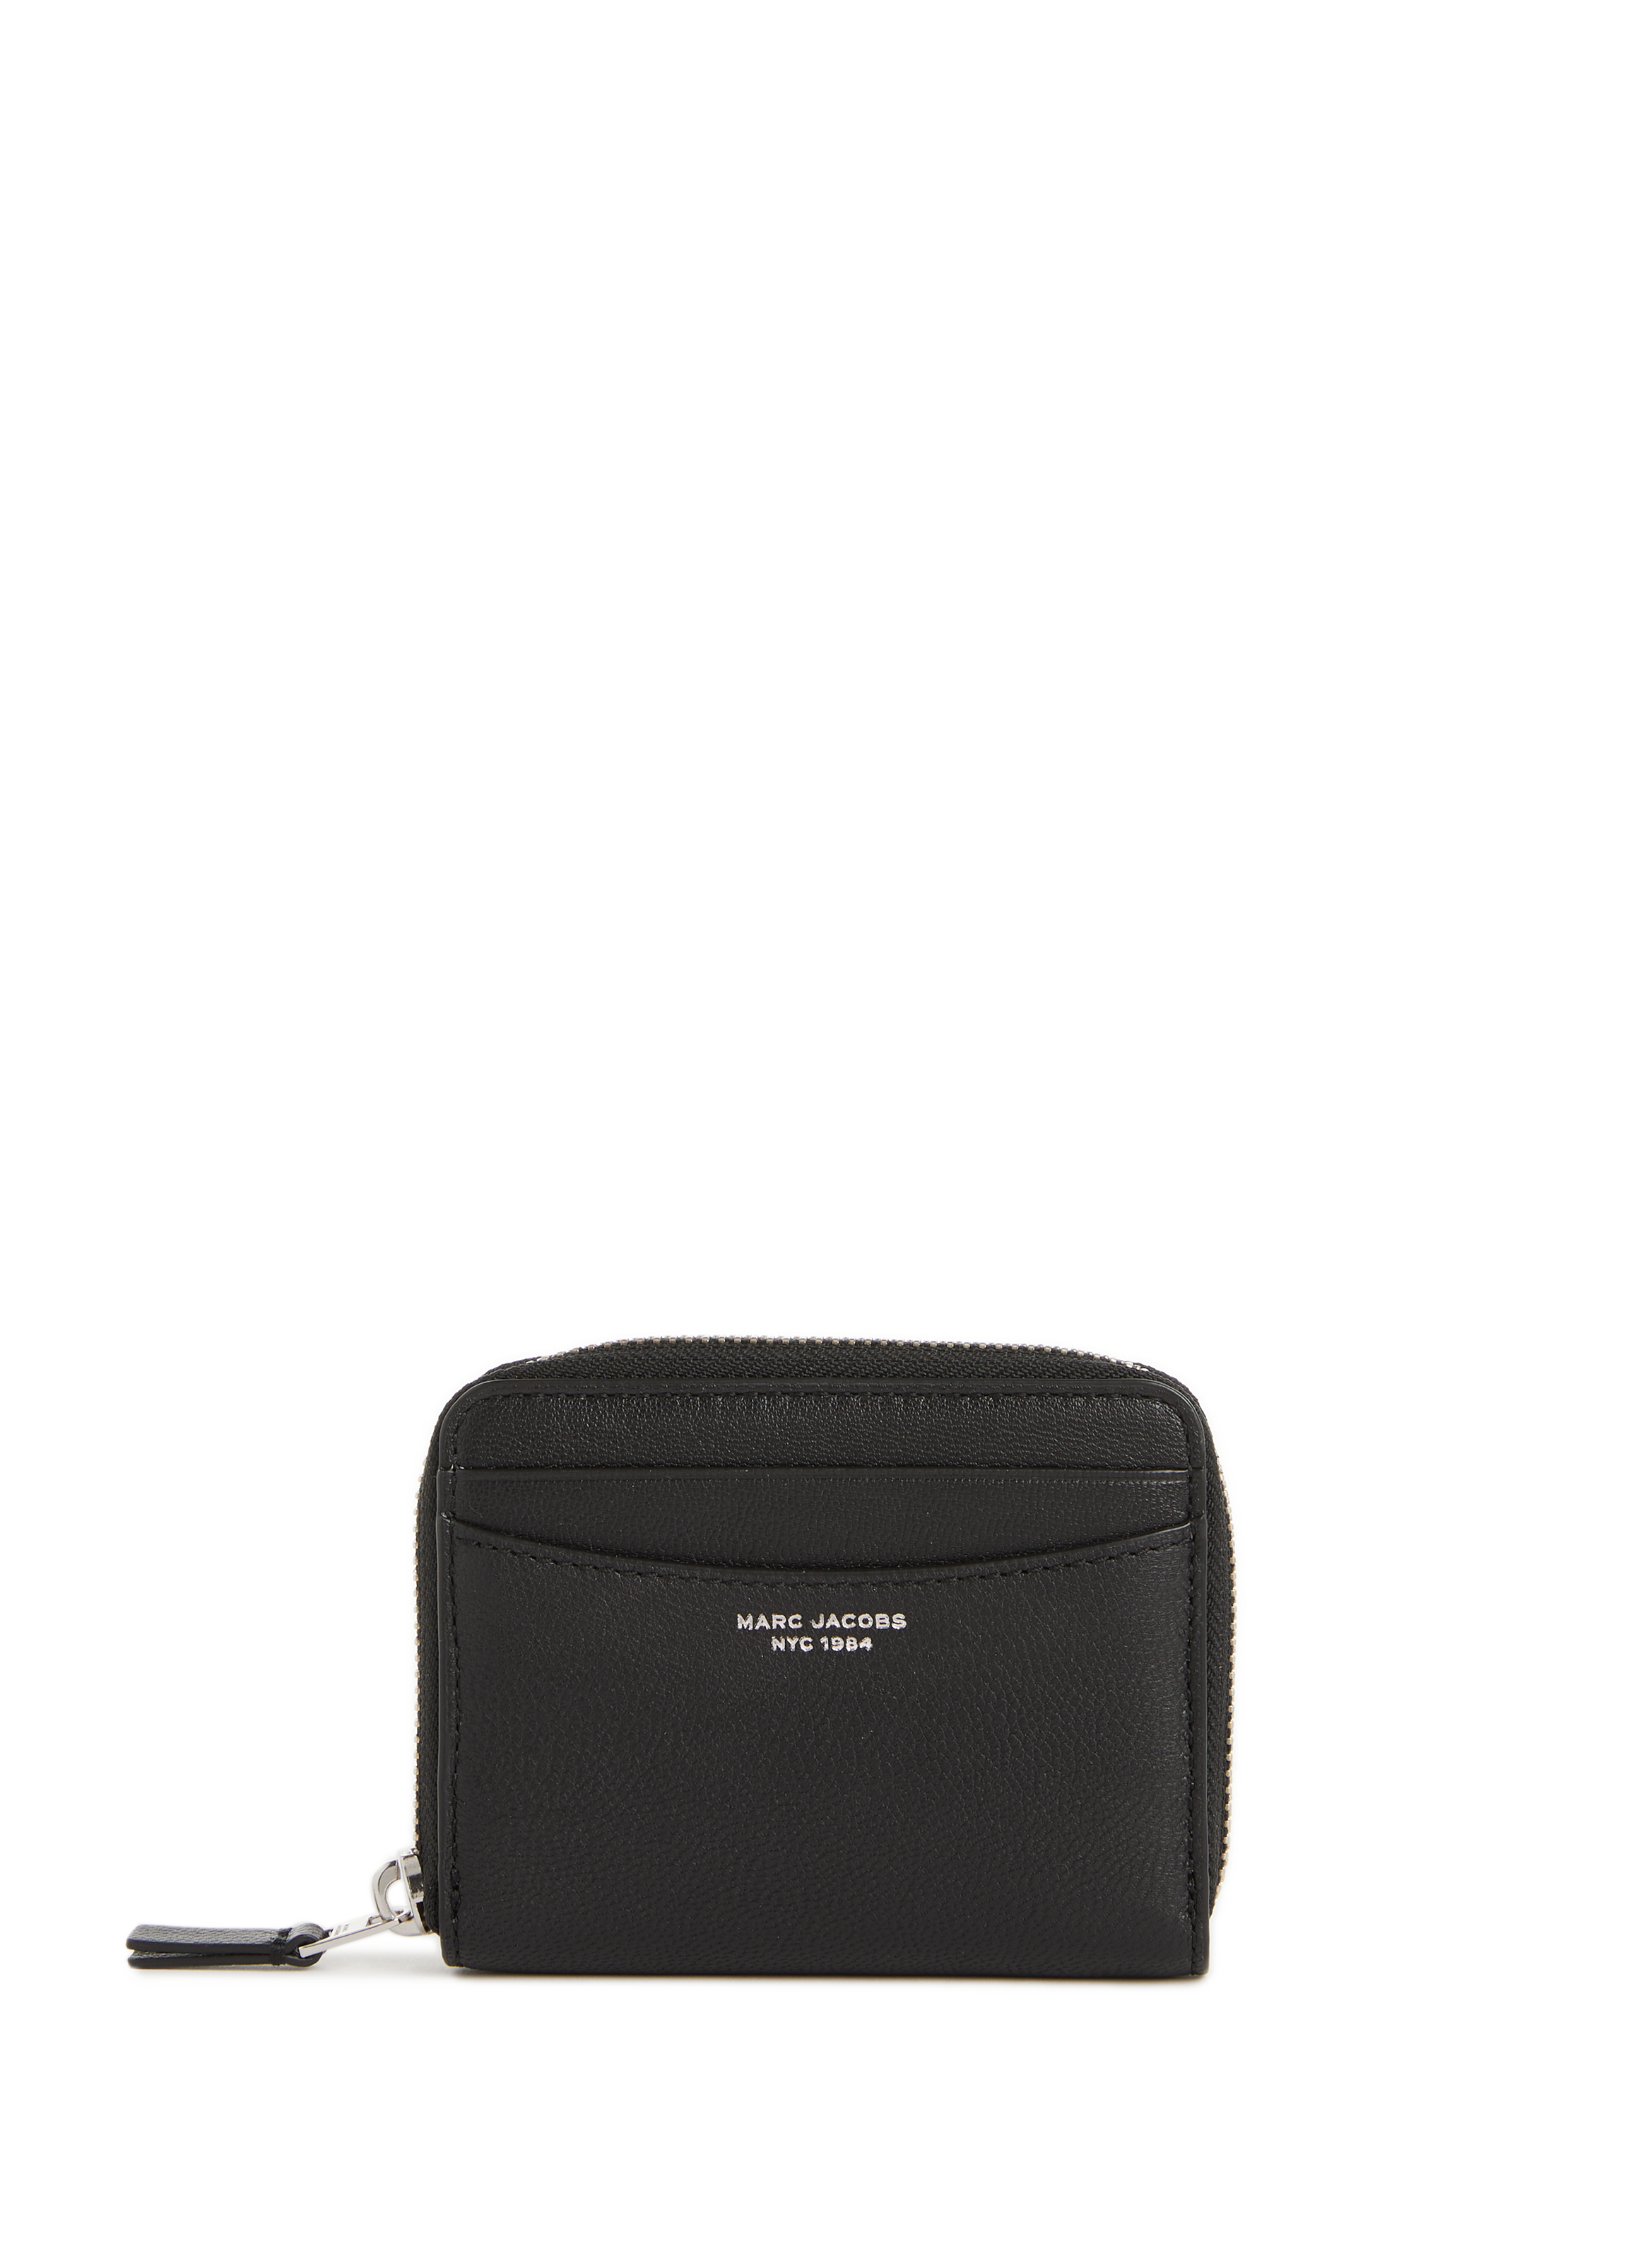 Marc Jacobs Outlet: wallet for women - Black | Marc Jacobs wallet  S171L03FA22 online at GIGLIO.COM